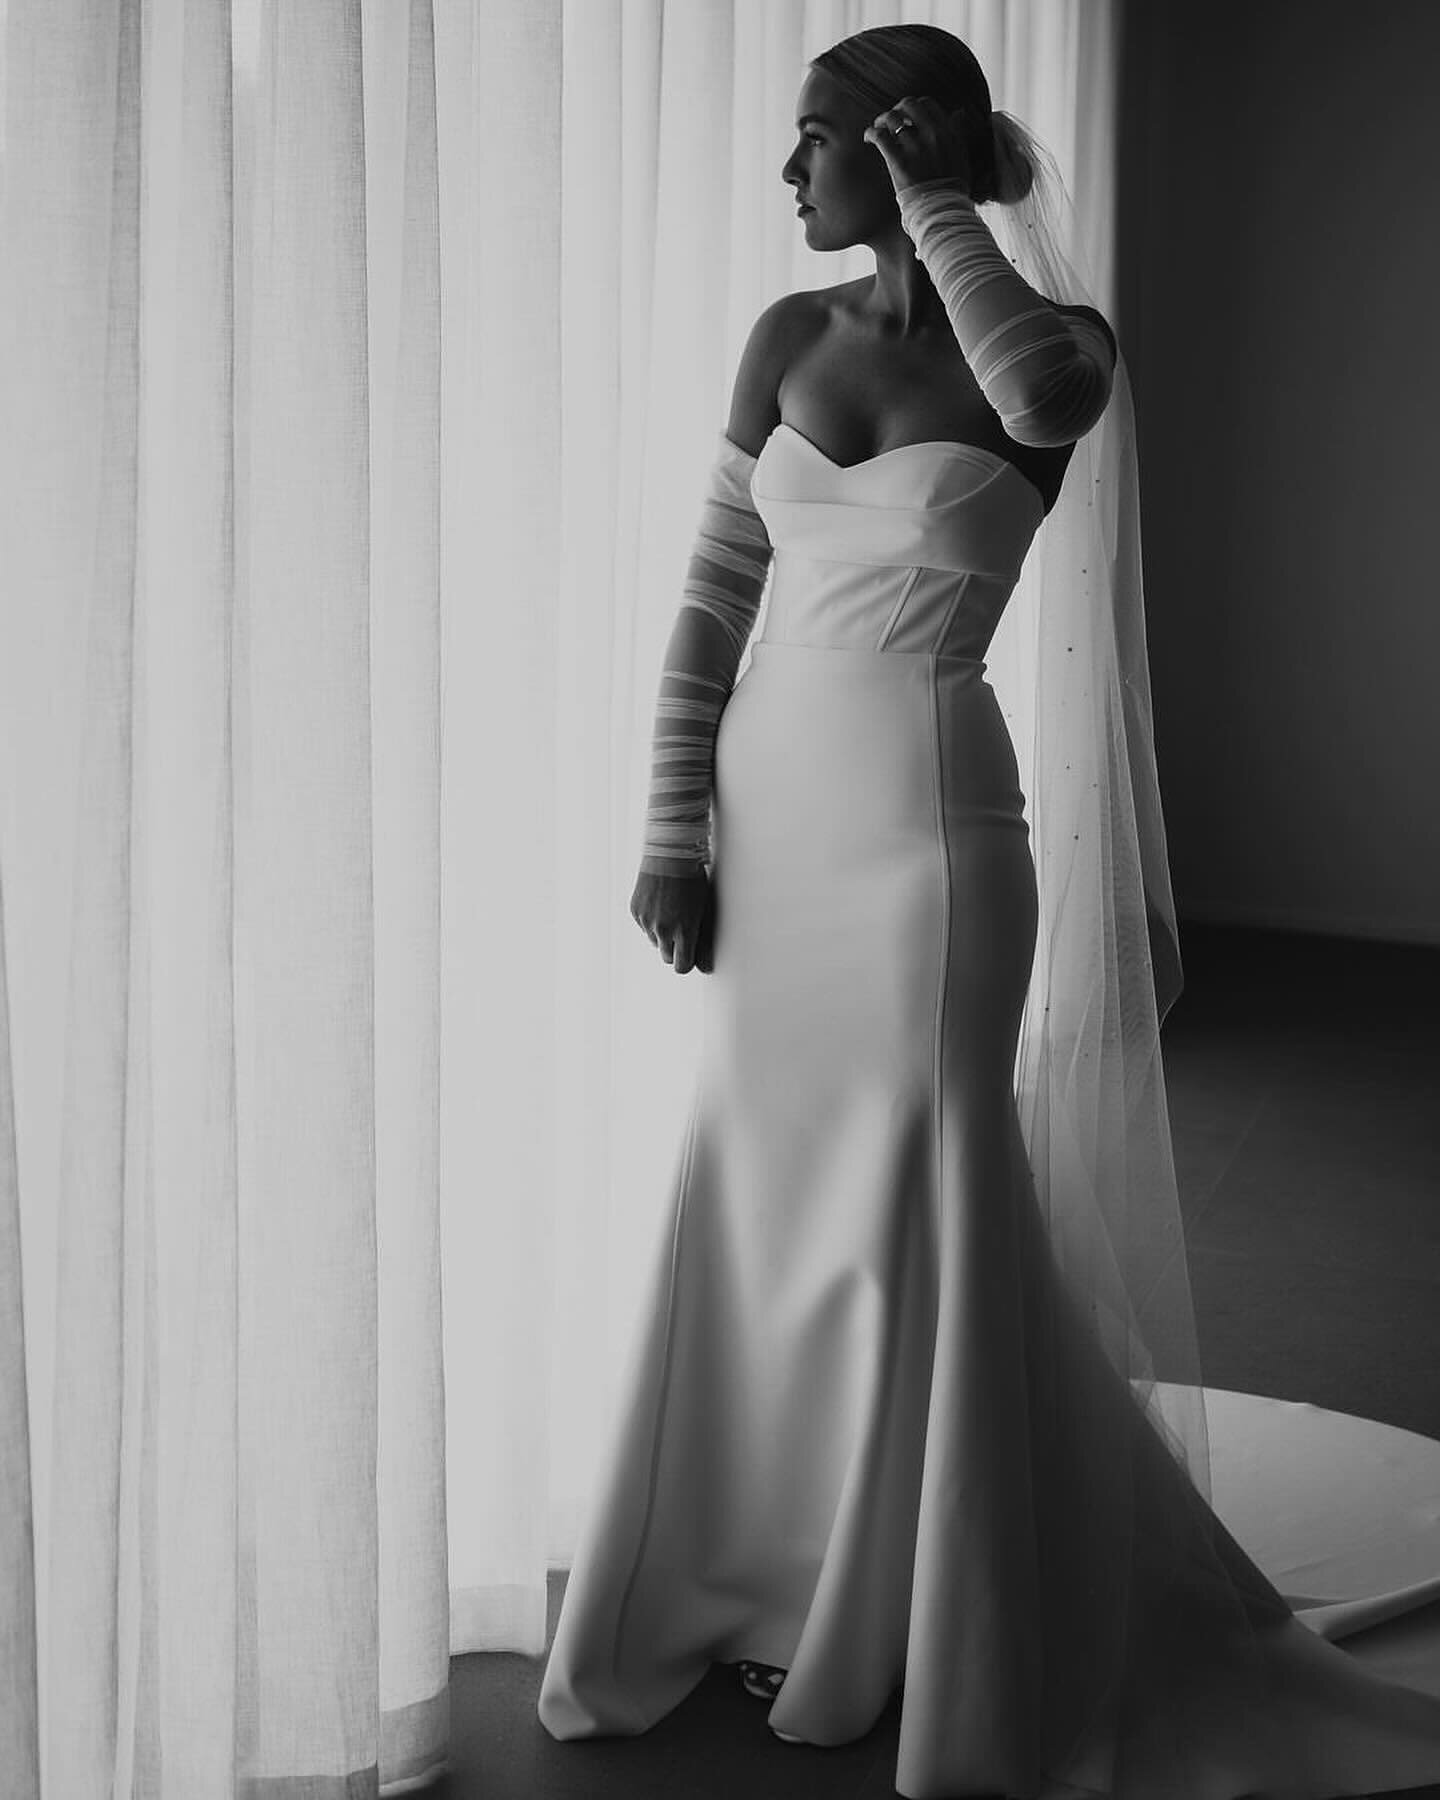 Forever fave - FAIRMONT

Doesn&rsquo;t need anything added but it&rsquo;s also the perfect gown to style

Try on at @haloandwrenbridal 

captured on beautiful bride Grace by @vickimillerphotography #janehillbridal #janehillbride #janehillfairmont #ja